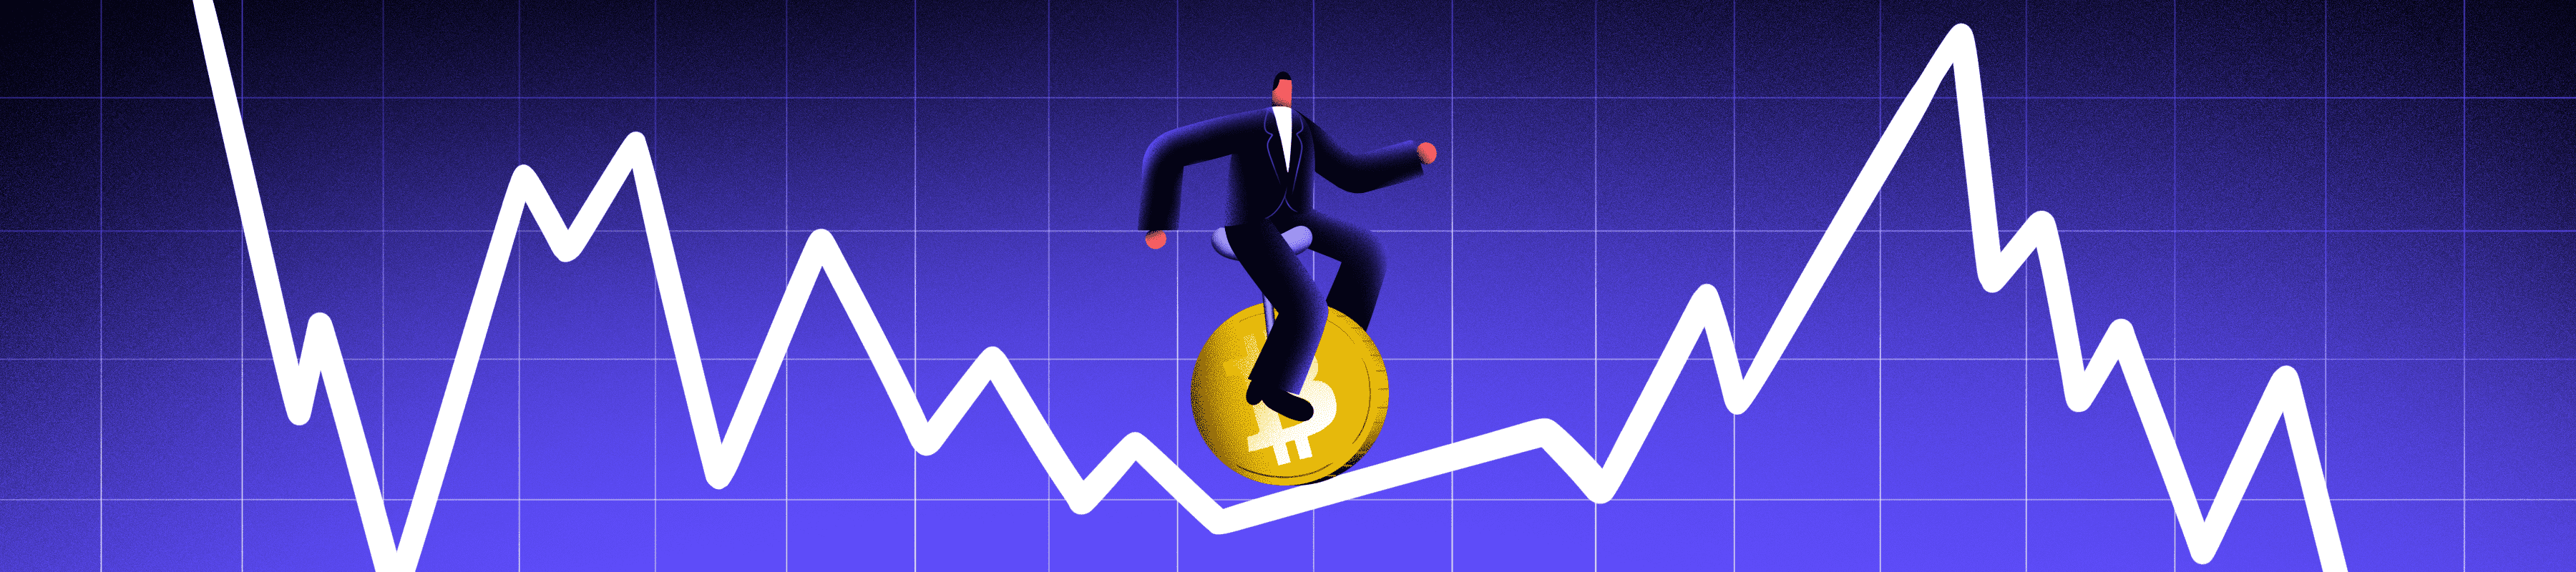 Money management in cryptocurrency trading